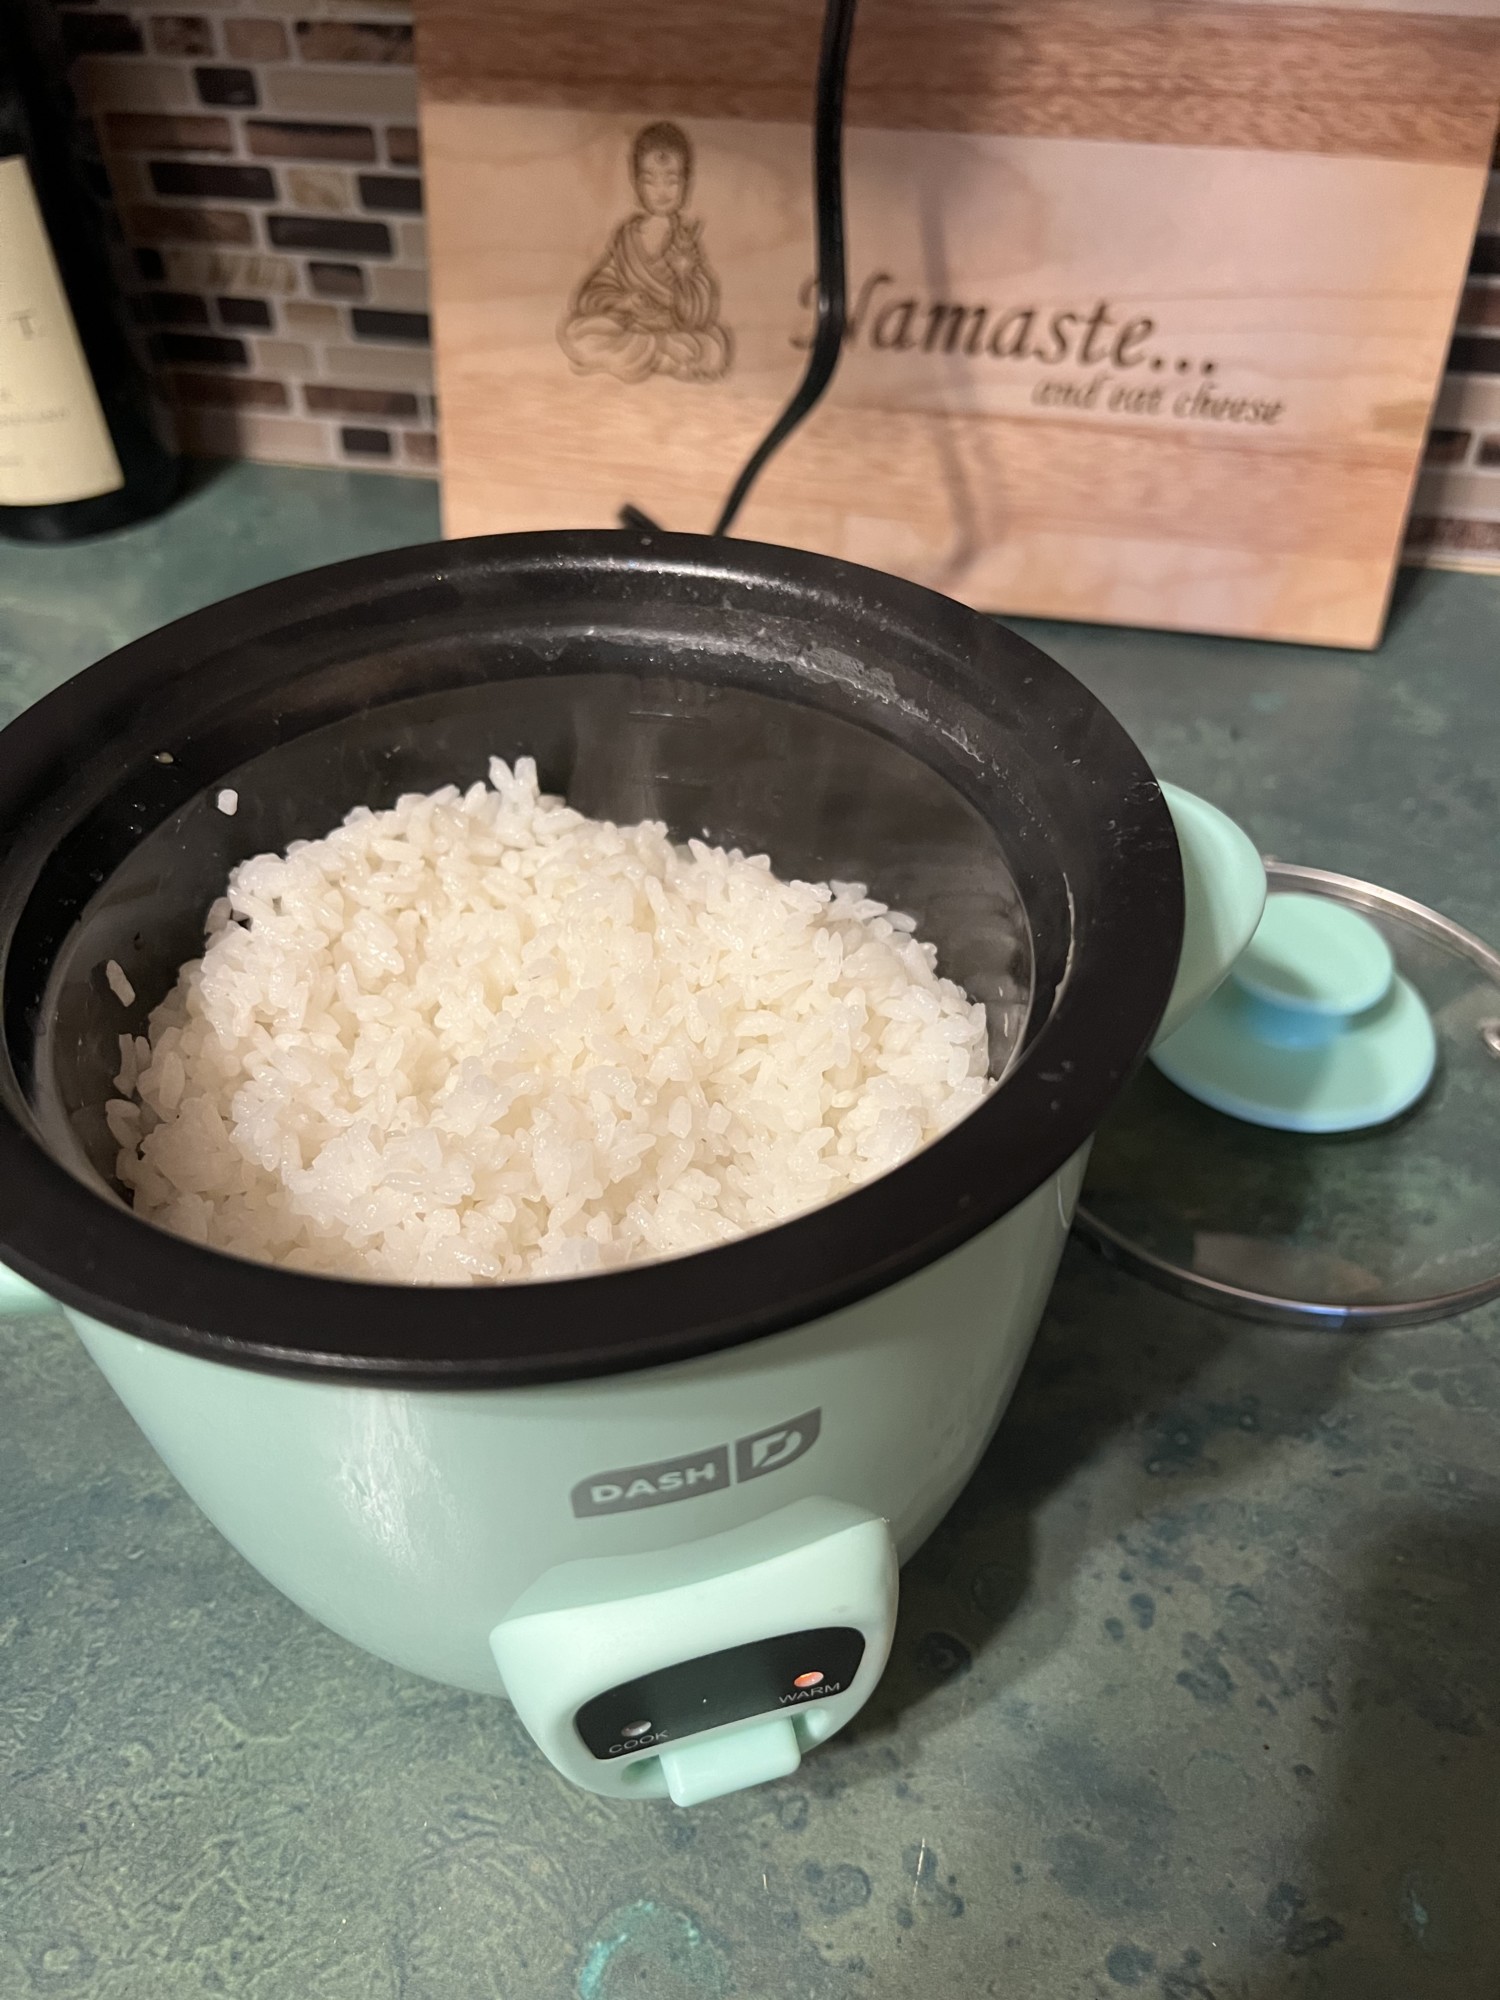 Dash Mini Rice Cookers fit nicely on the countertop and are now